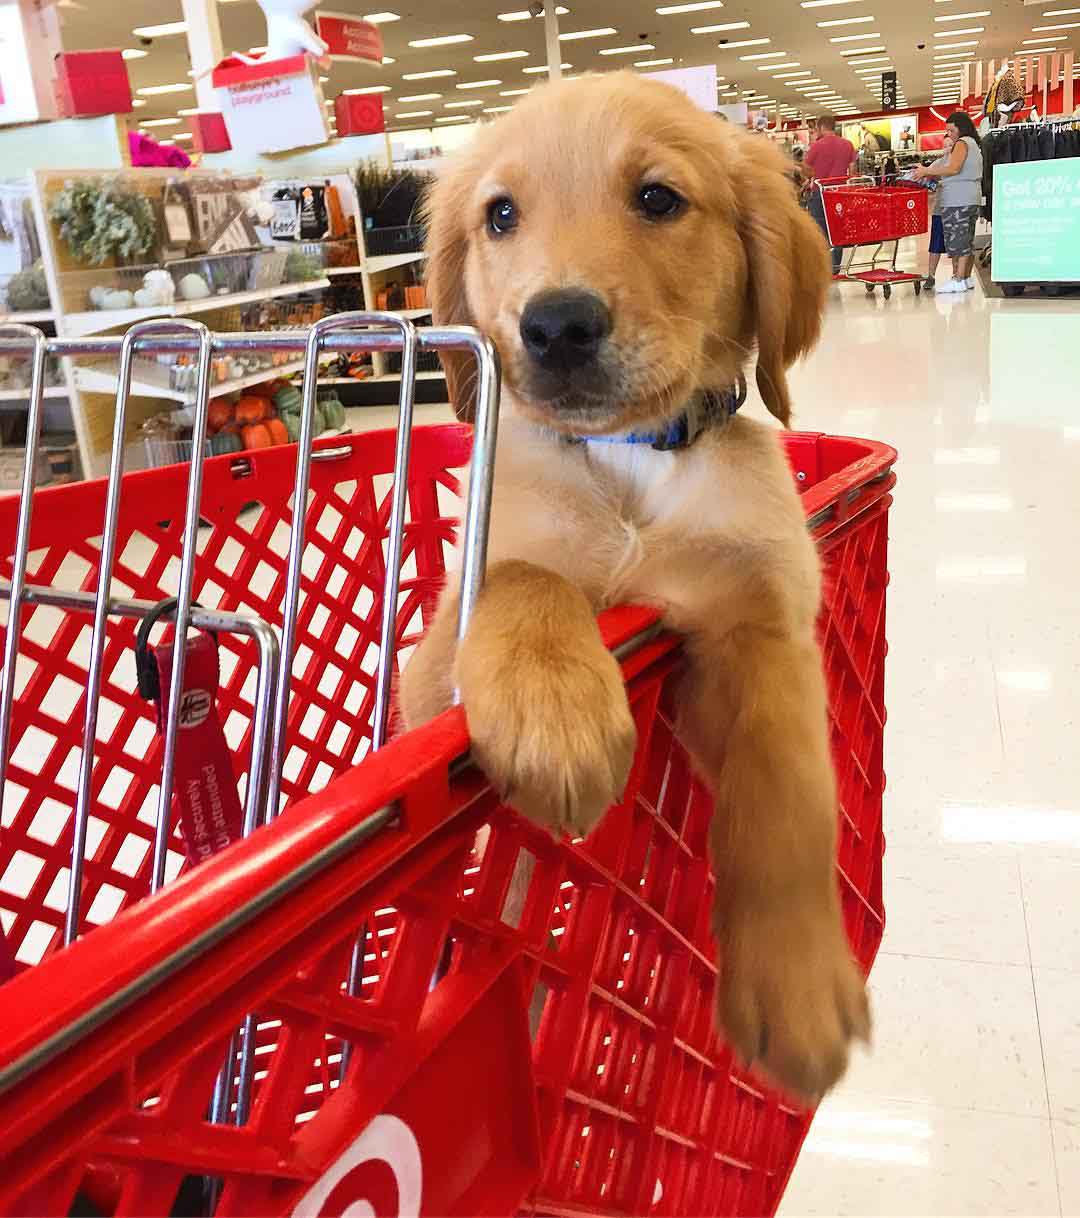 Guess who is really excited to shop?